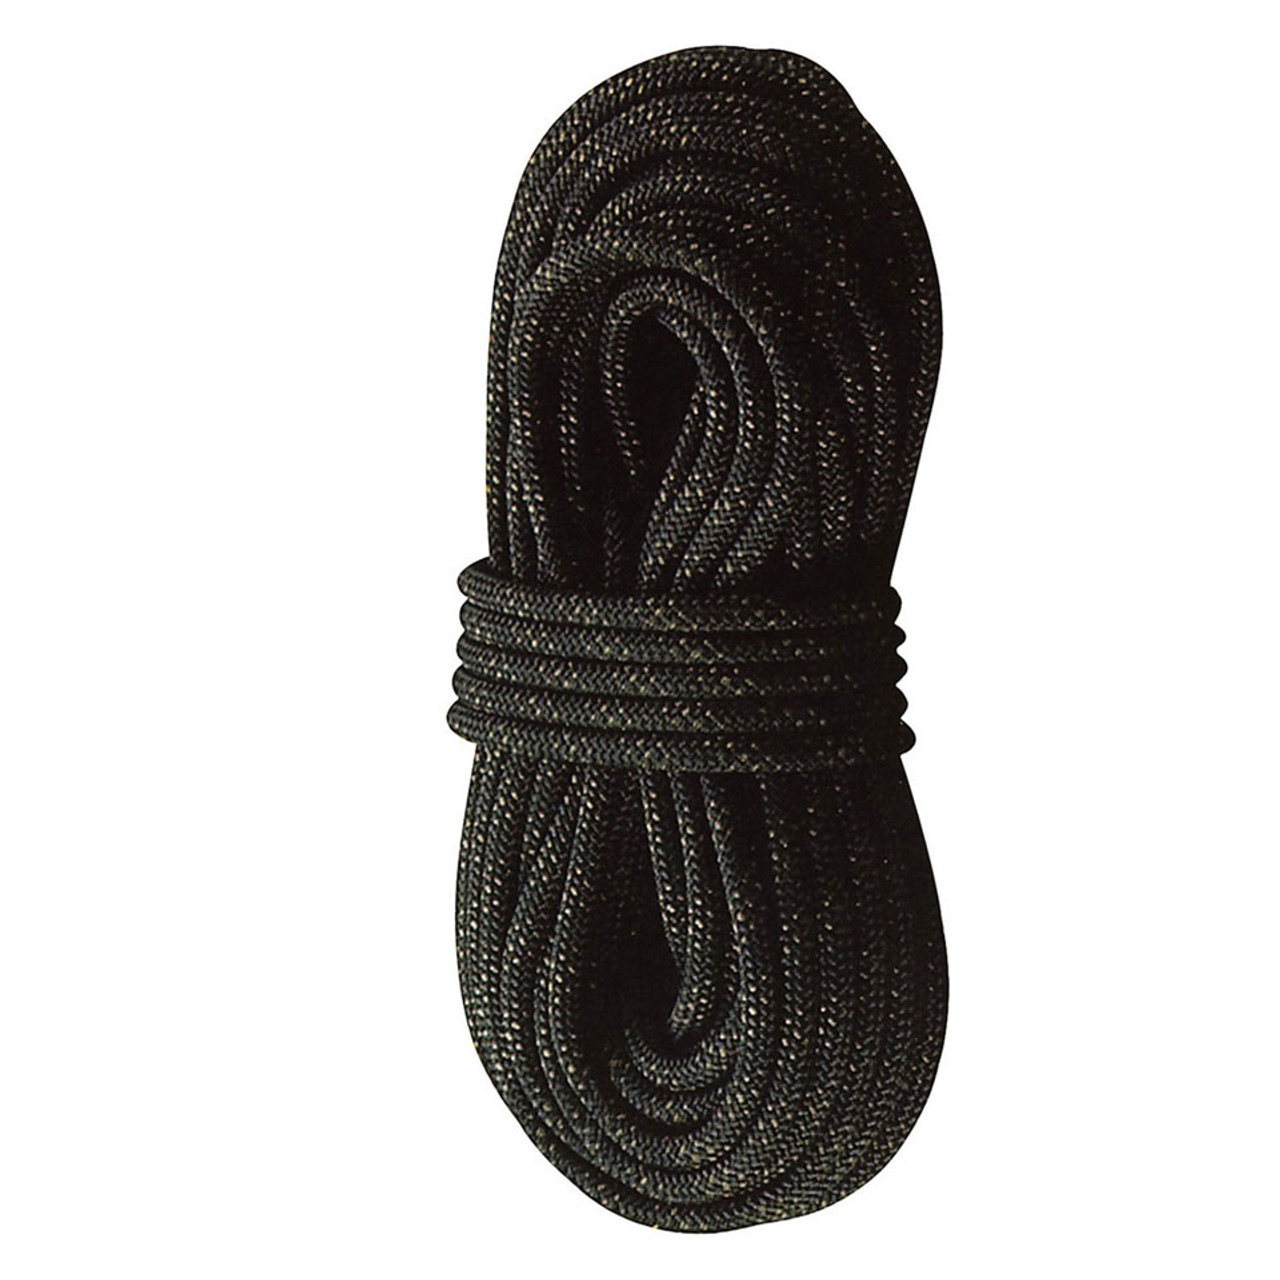 Shop S.W.A.T./Ranger Rappelling Rope - Fatigues Army Navy Gear